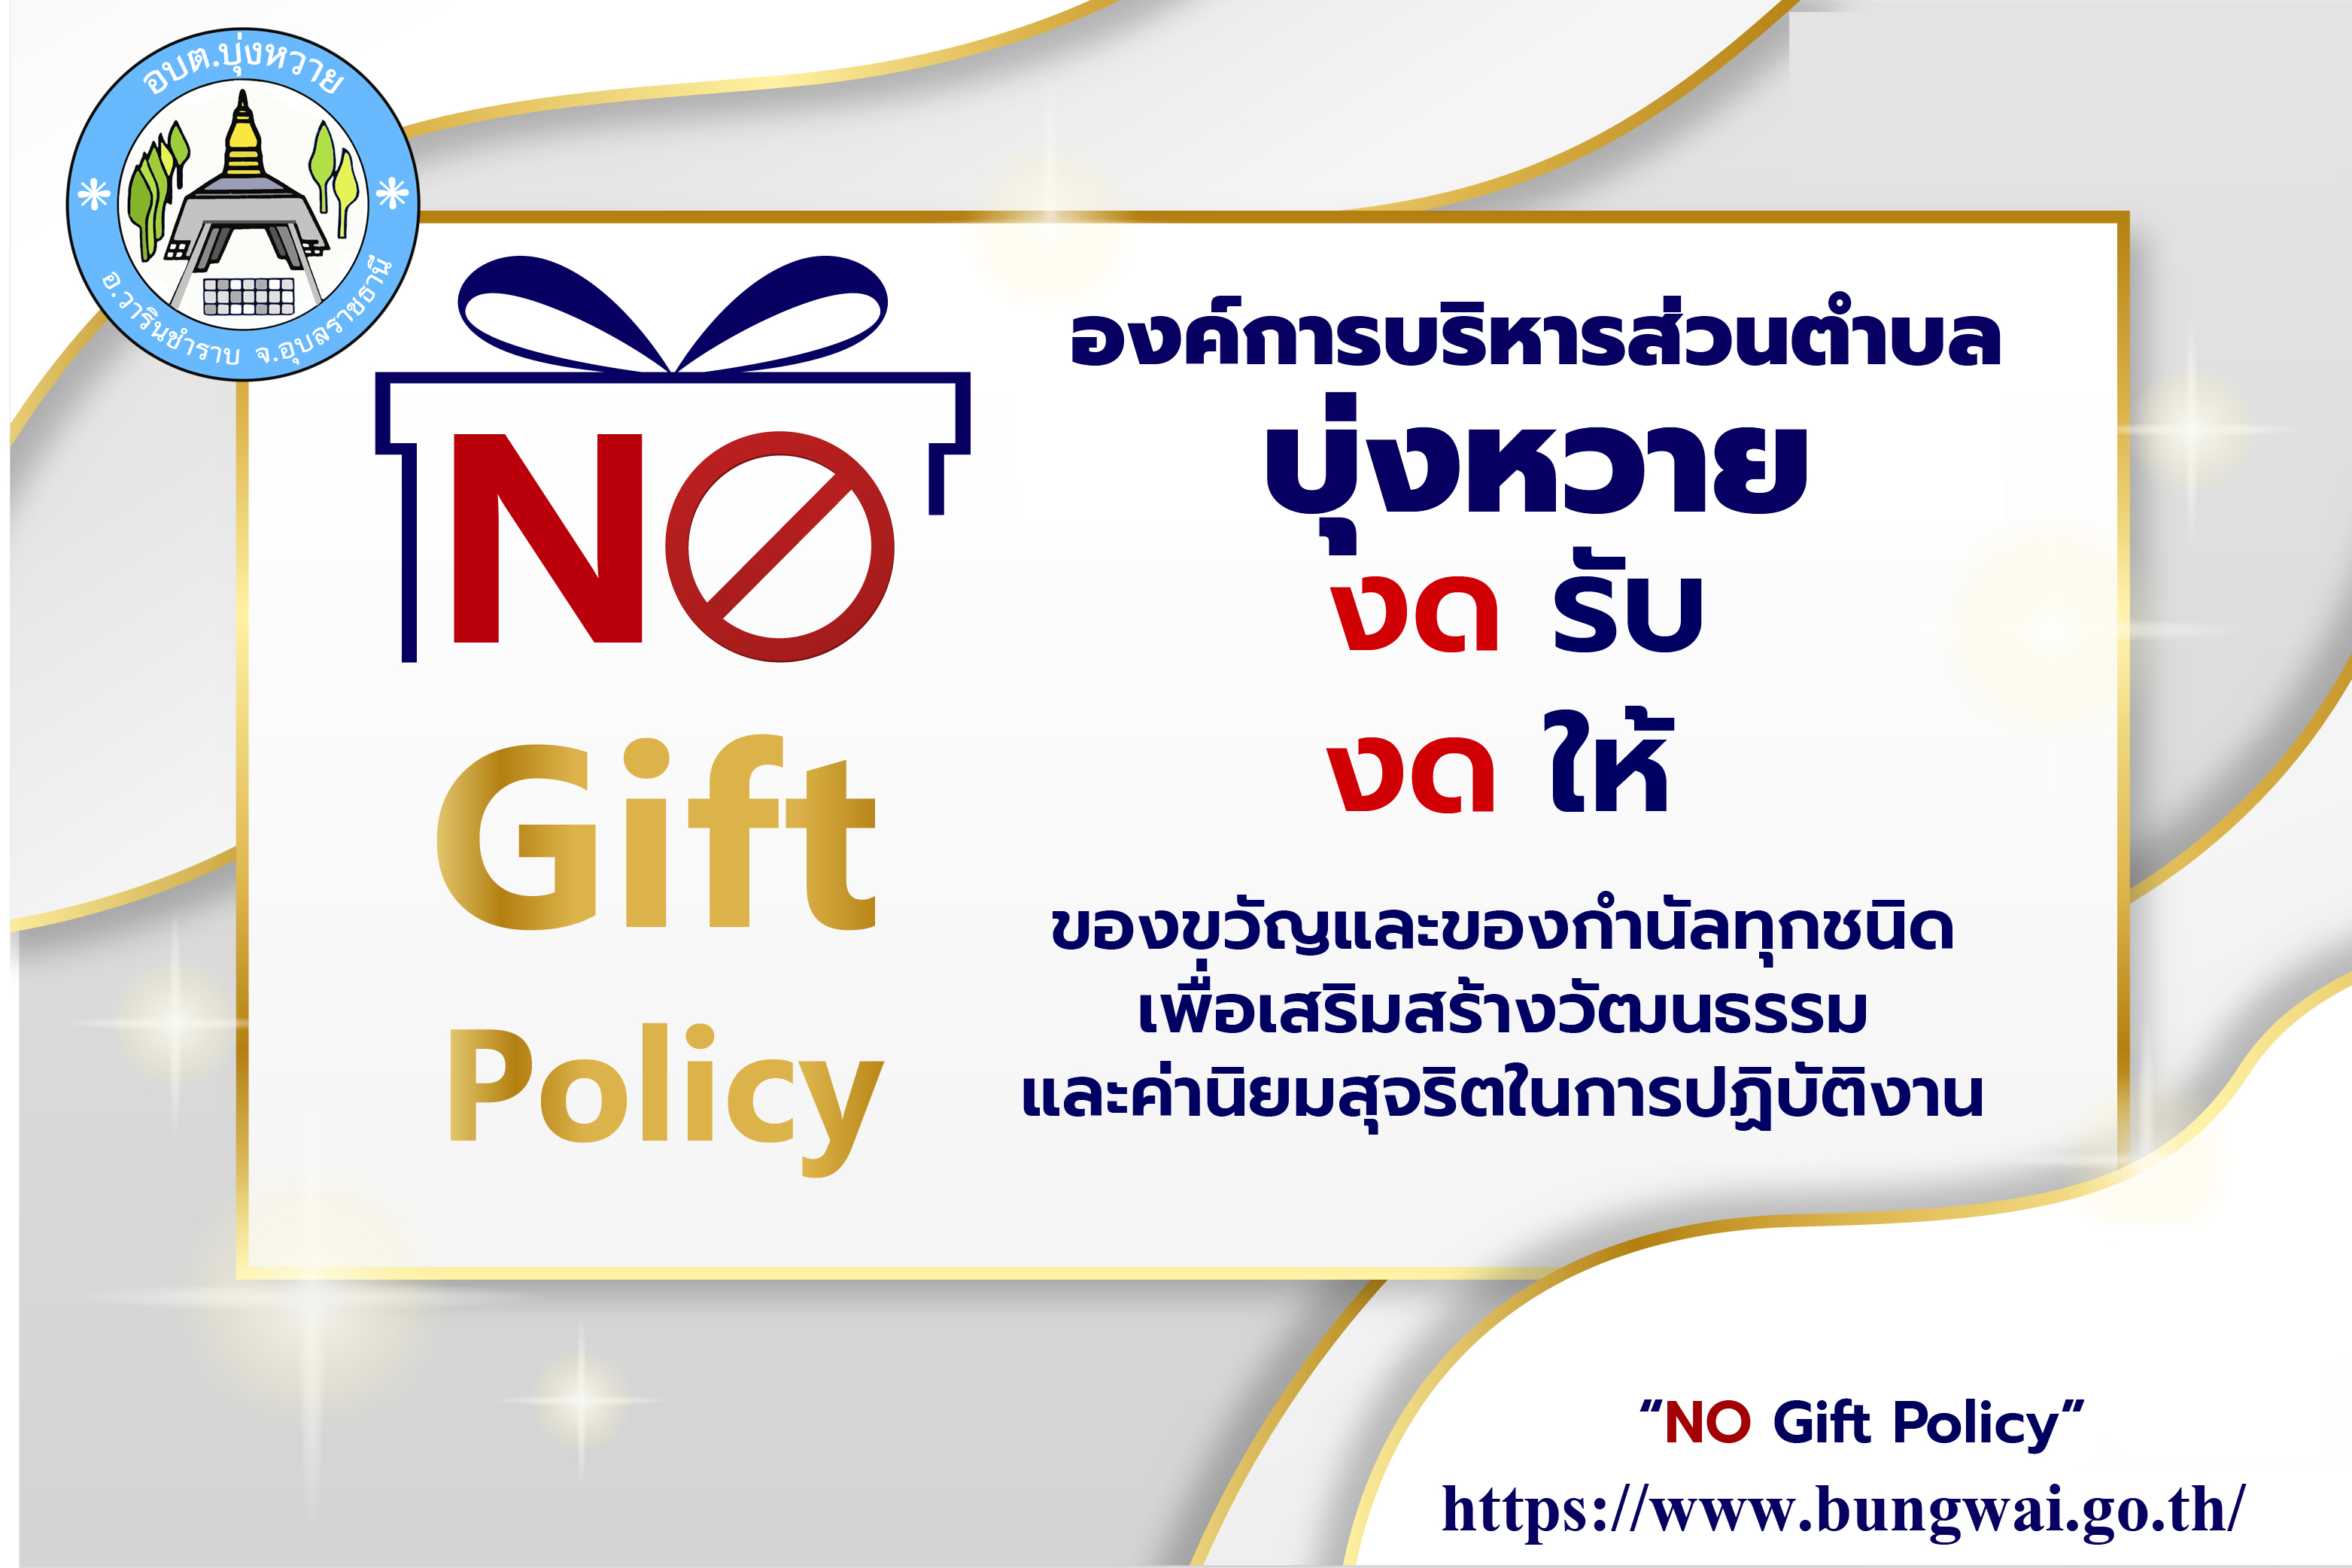 no gift policy